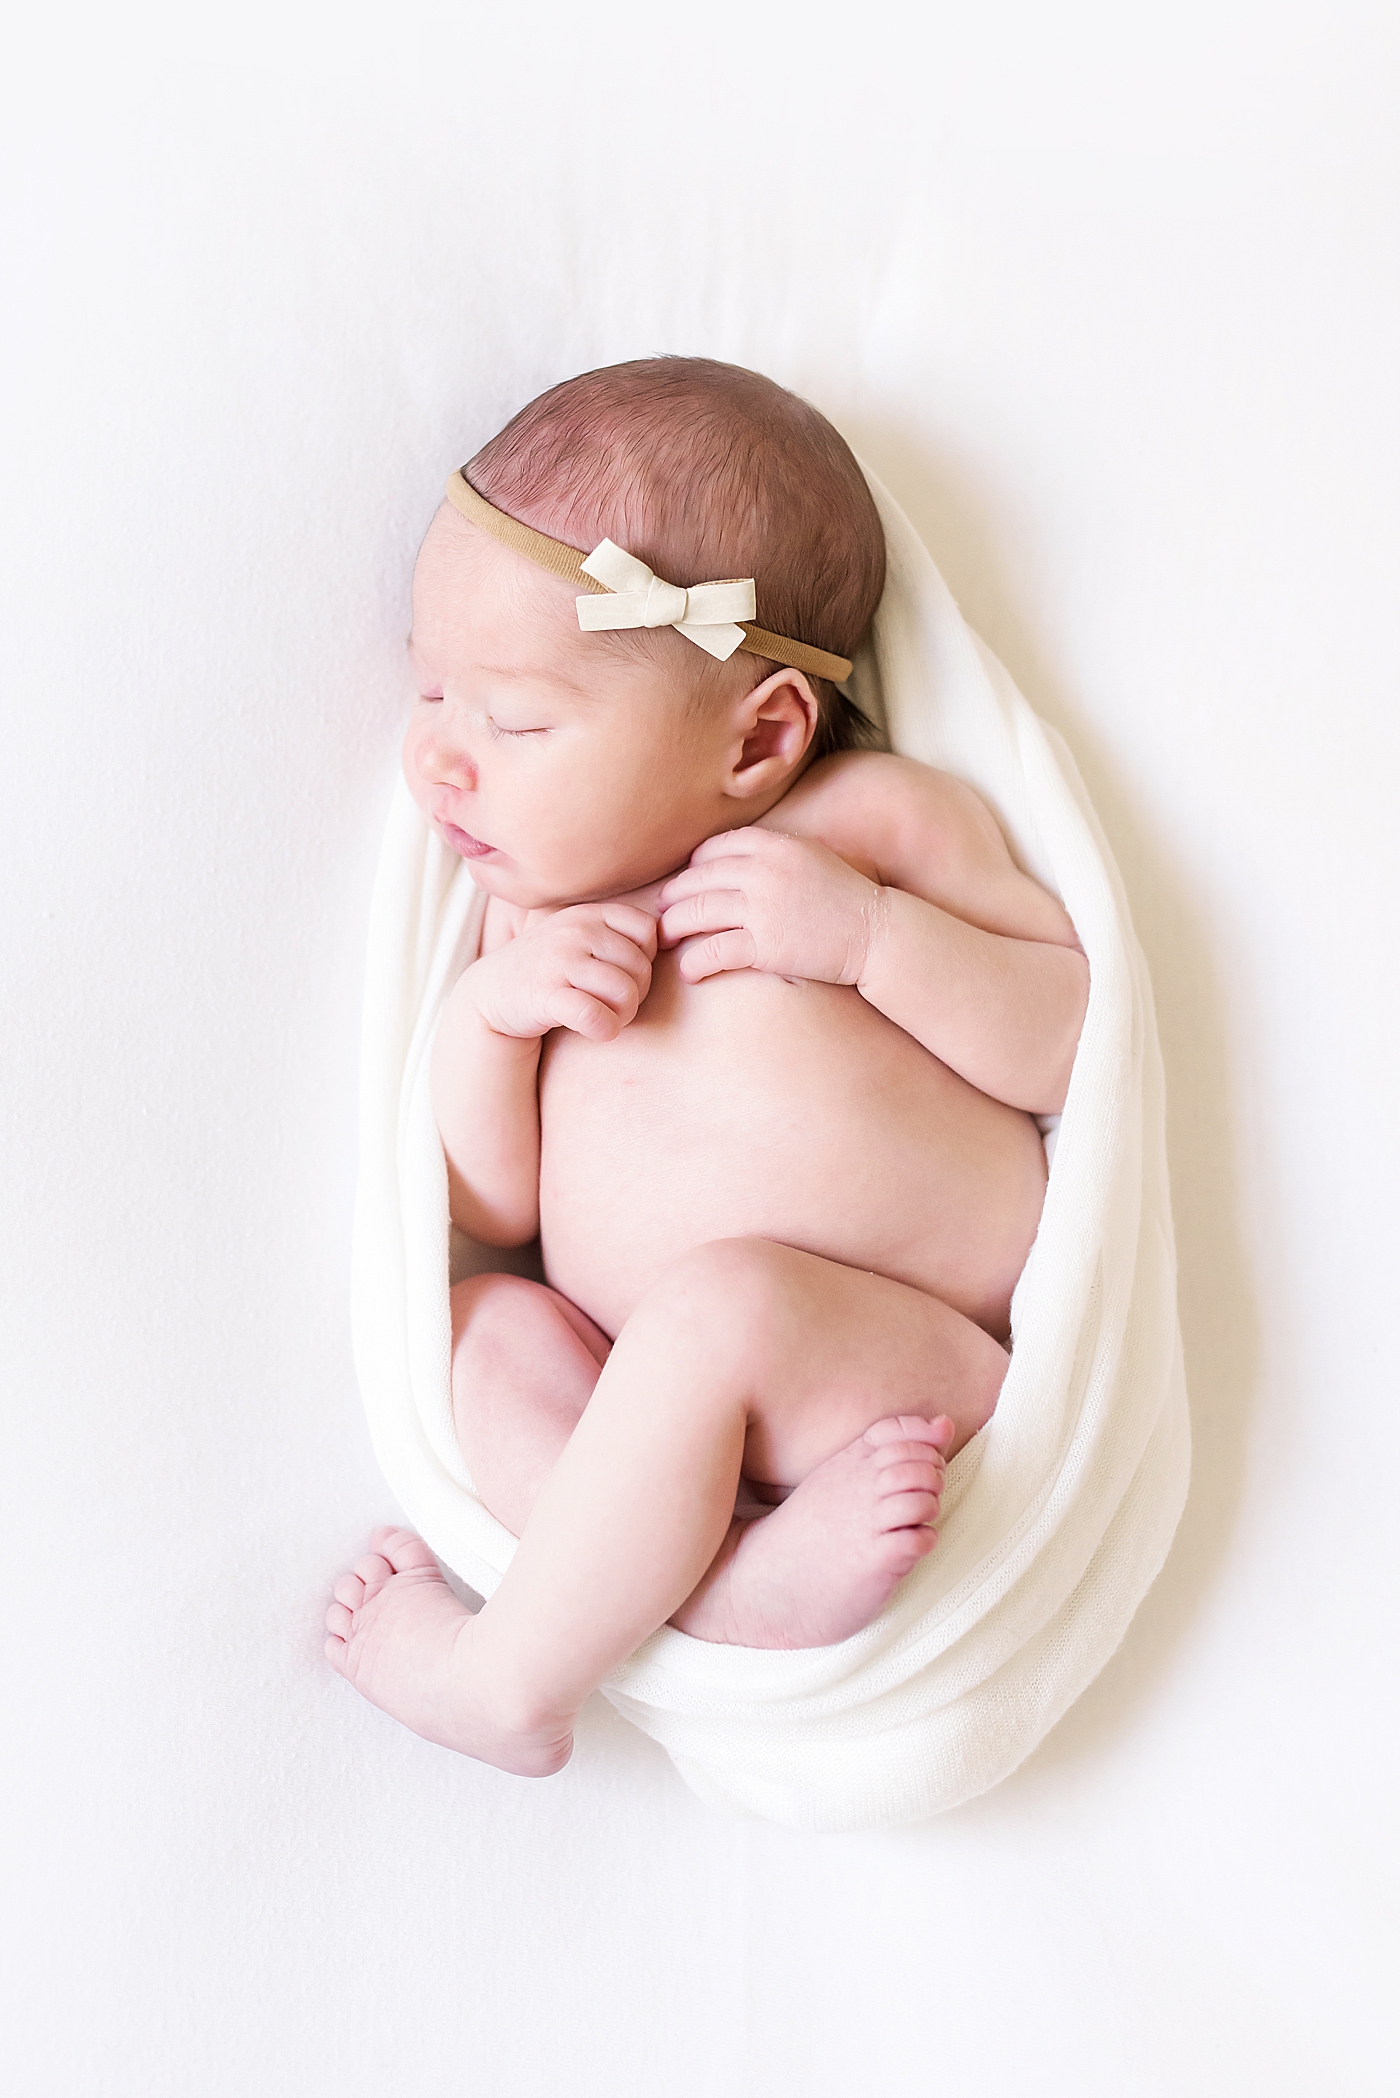 Baby girl wrapped in a white swaddle with a bow headband | Photo by Anna Wisjo Photography 